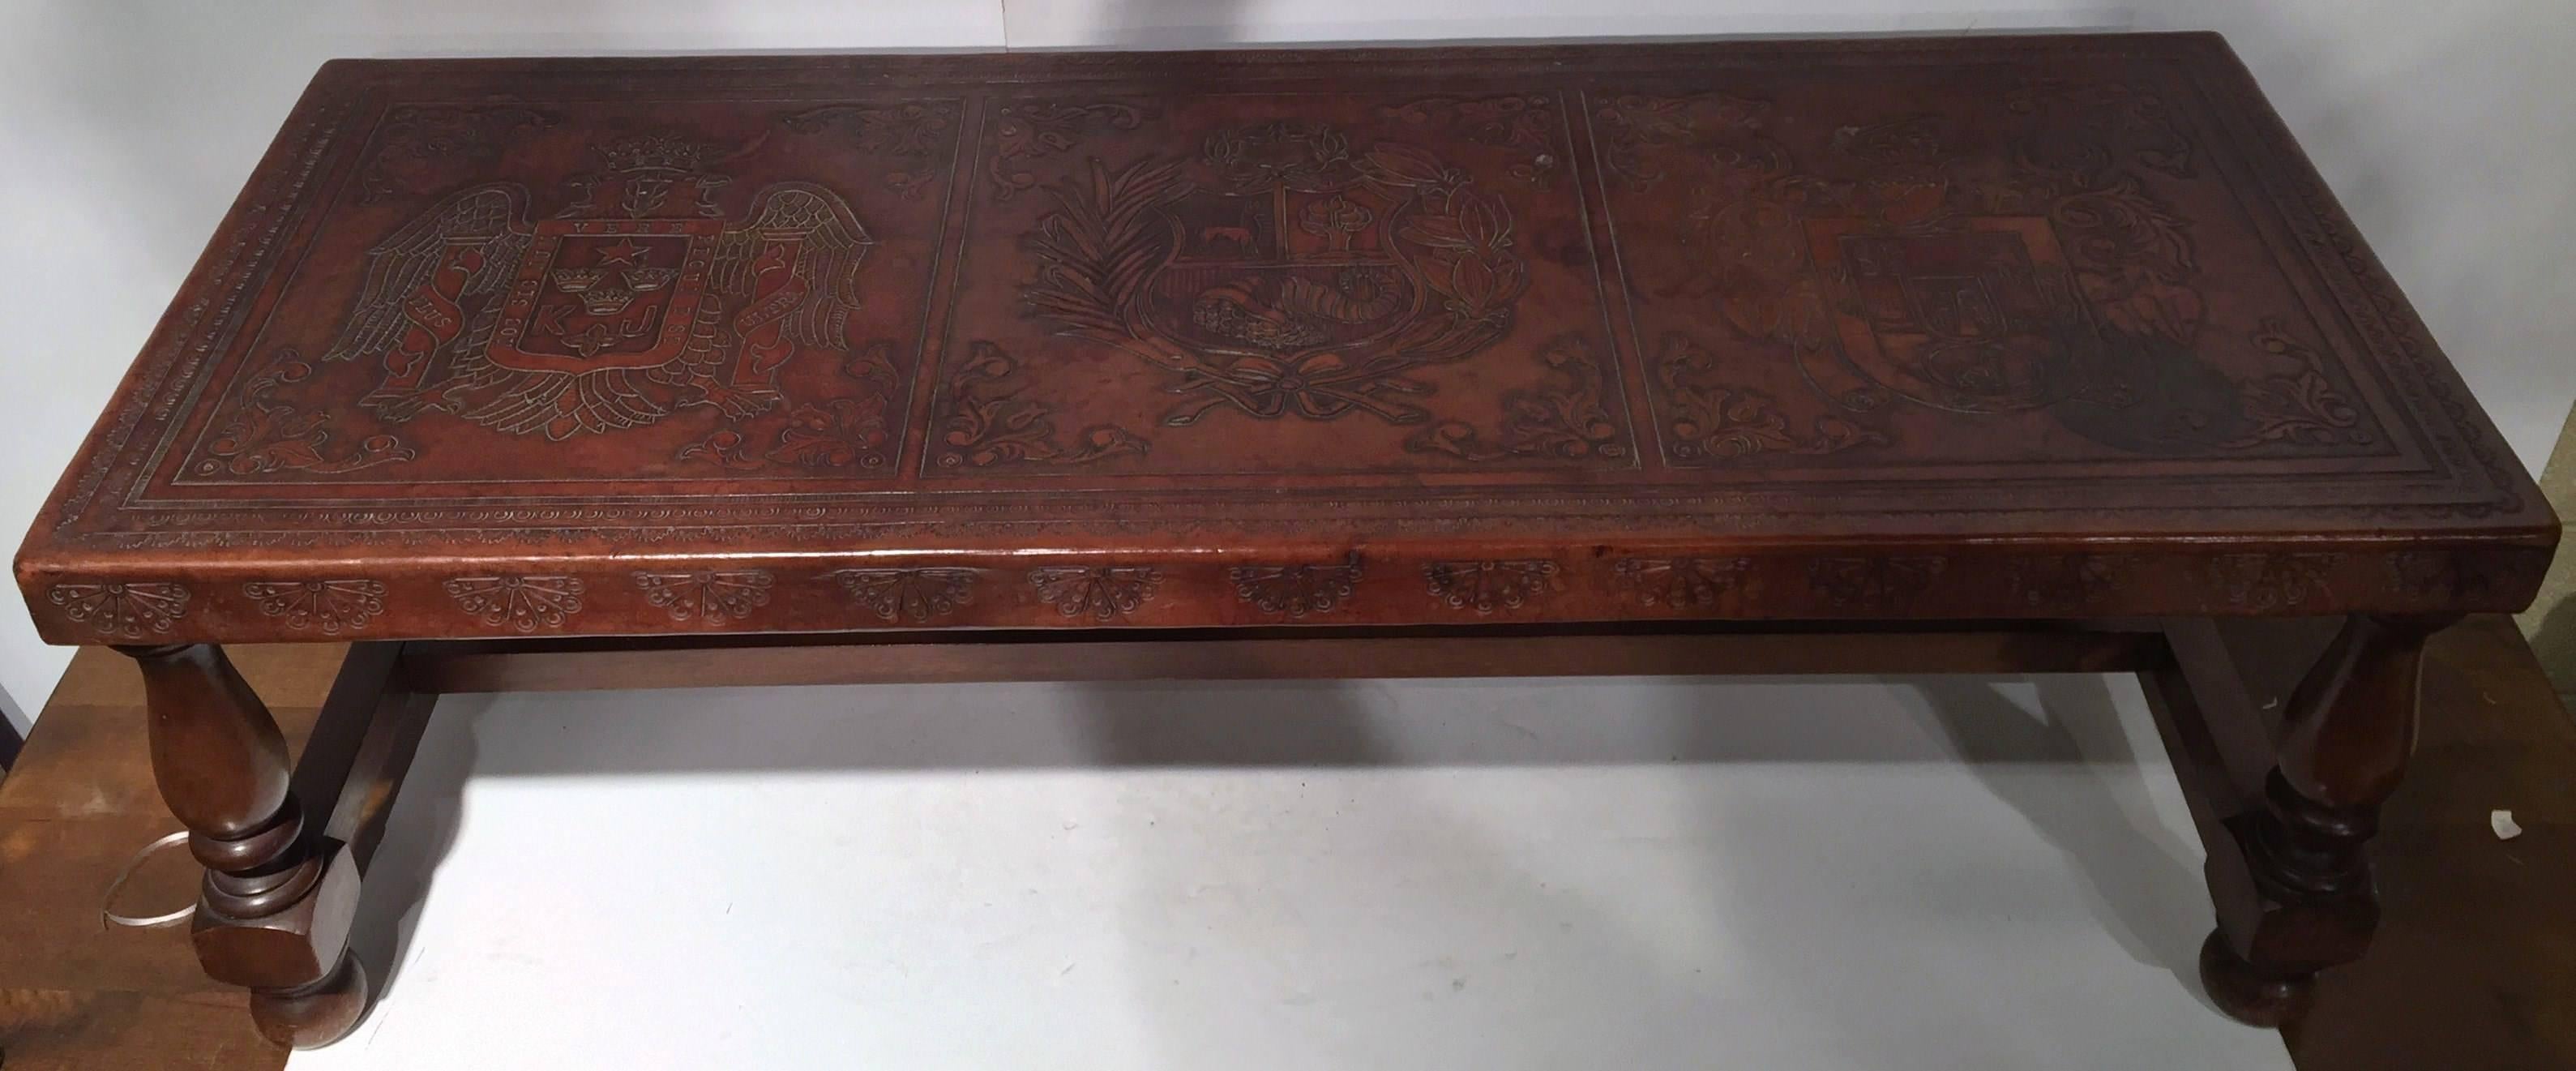 Interesting 19th century walnut bench coffee table from Southern France, circa 1880, featuring tool leather top and 3 embossed coat of arms from 3 different families. Beautiful condition and patina. 